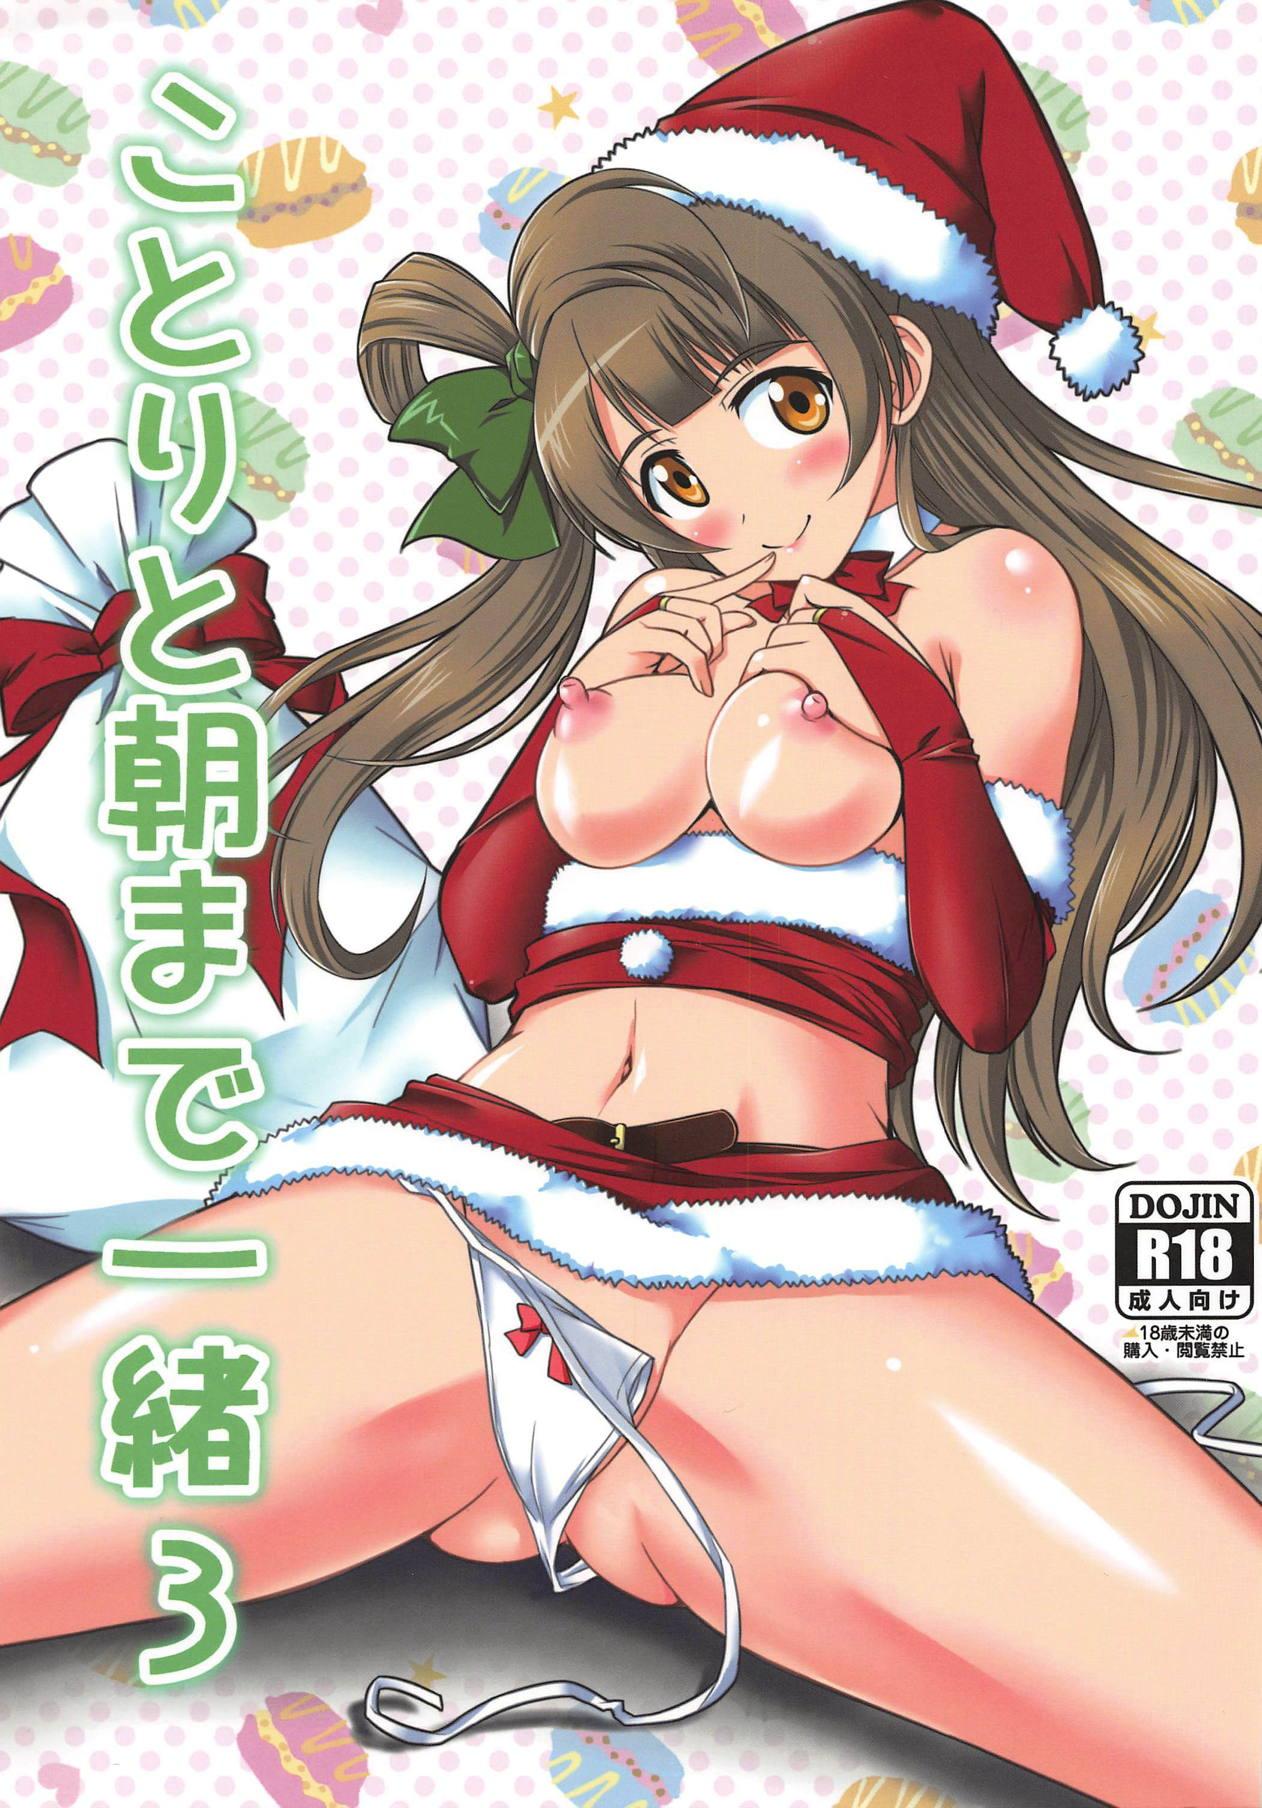 Adolescente Kotori to Asa made Issho 3 - Love live Hot Cunt - Picture 1